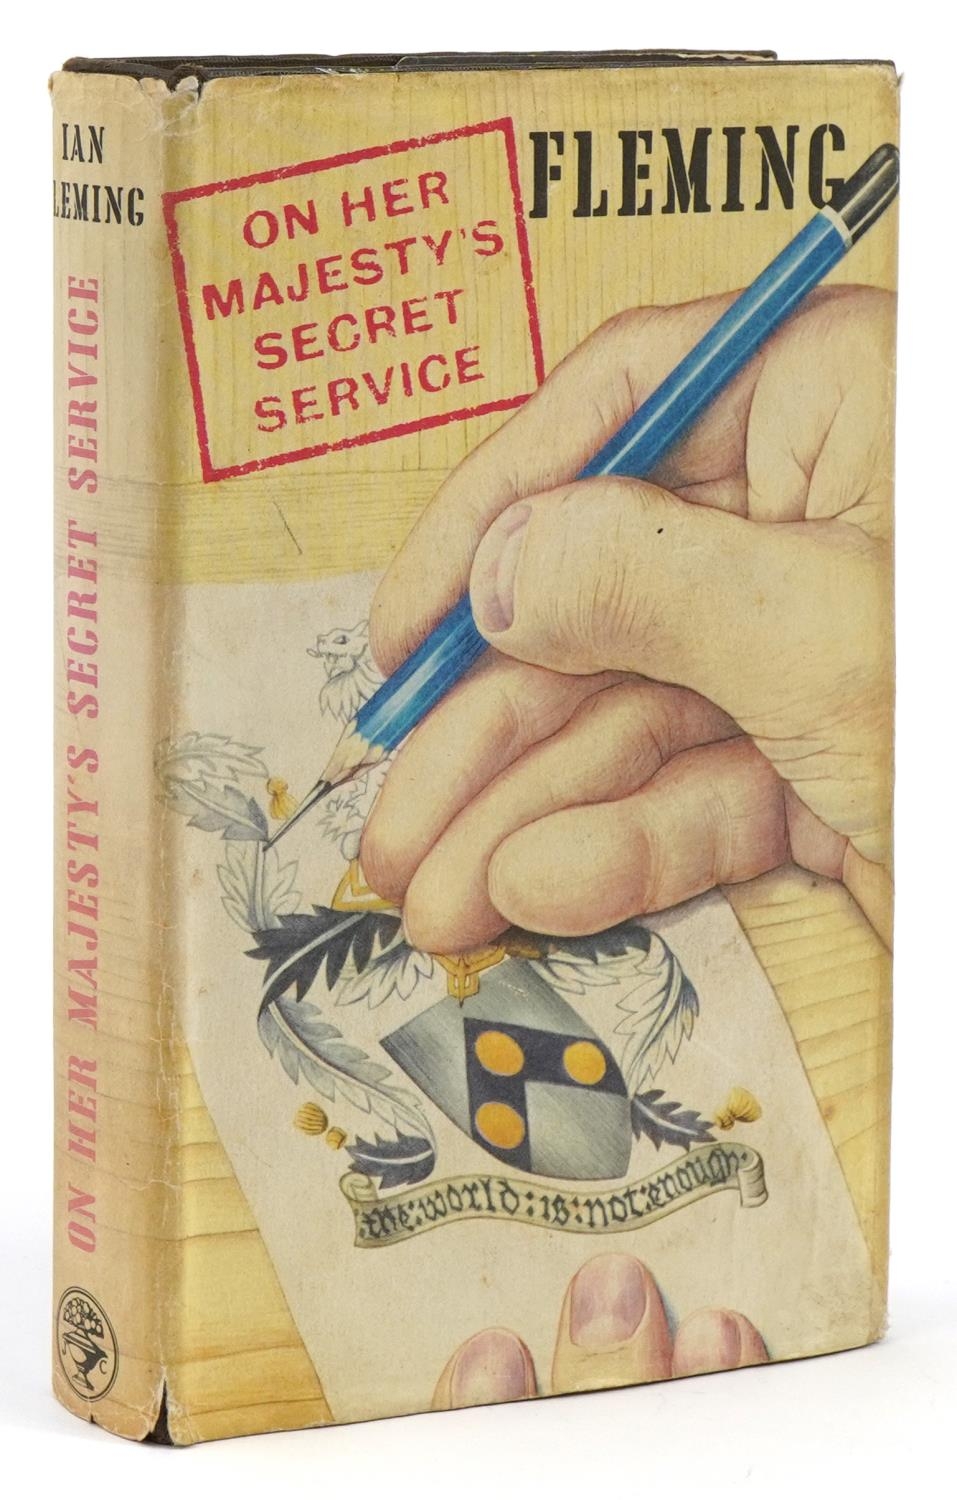 On Her Majesty's Secret Service, hardback book with dust jacket by Ian Fleming first published